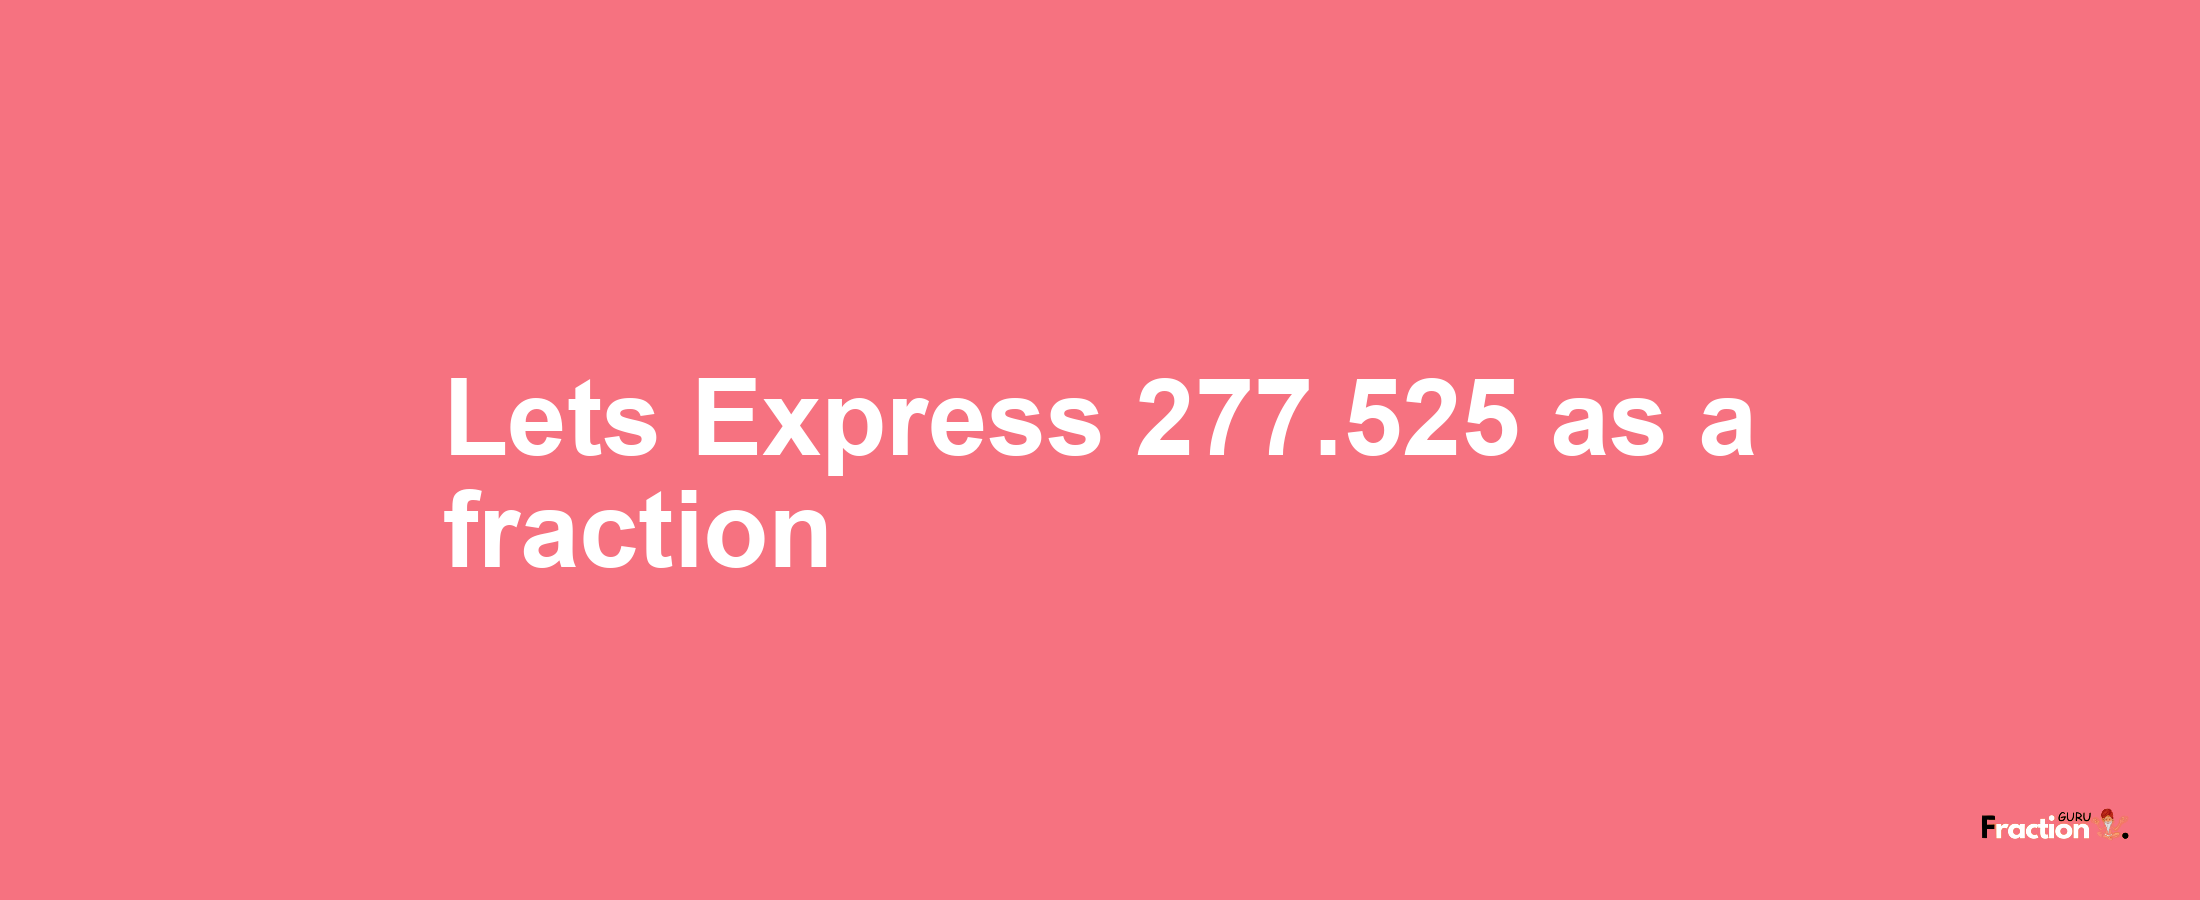 Lets Express 277.525 as afraction